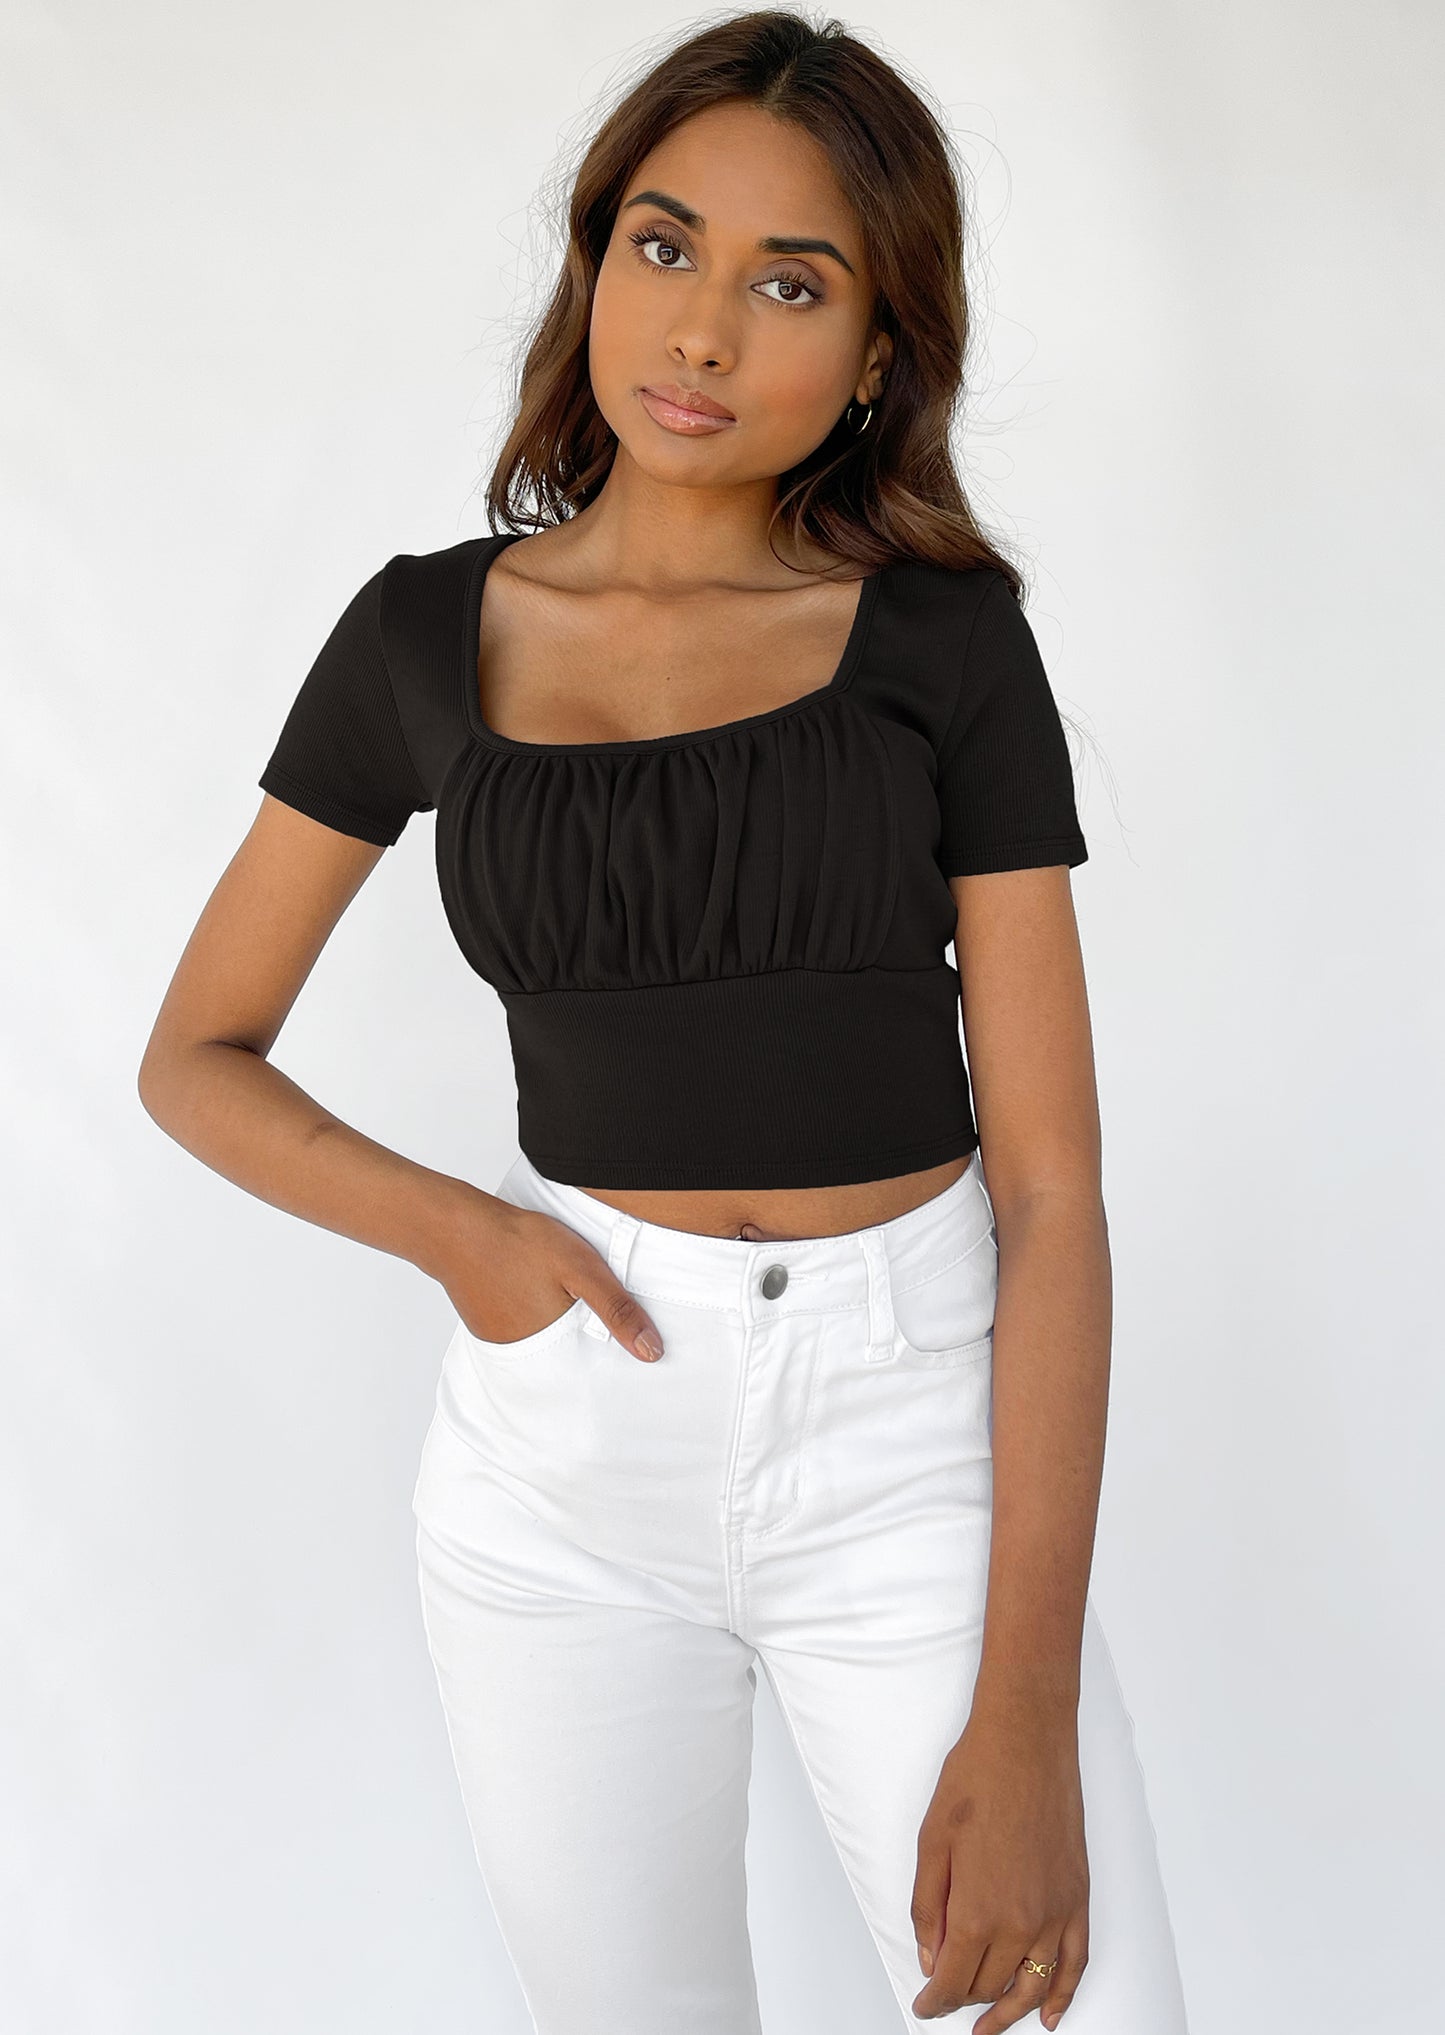 Ruched t-shirt in black